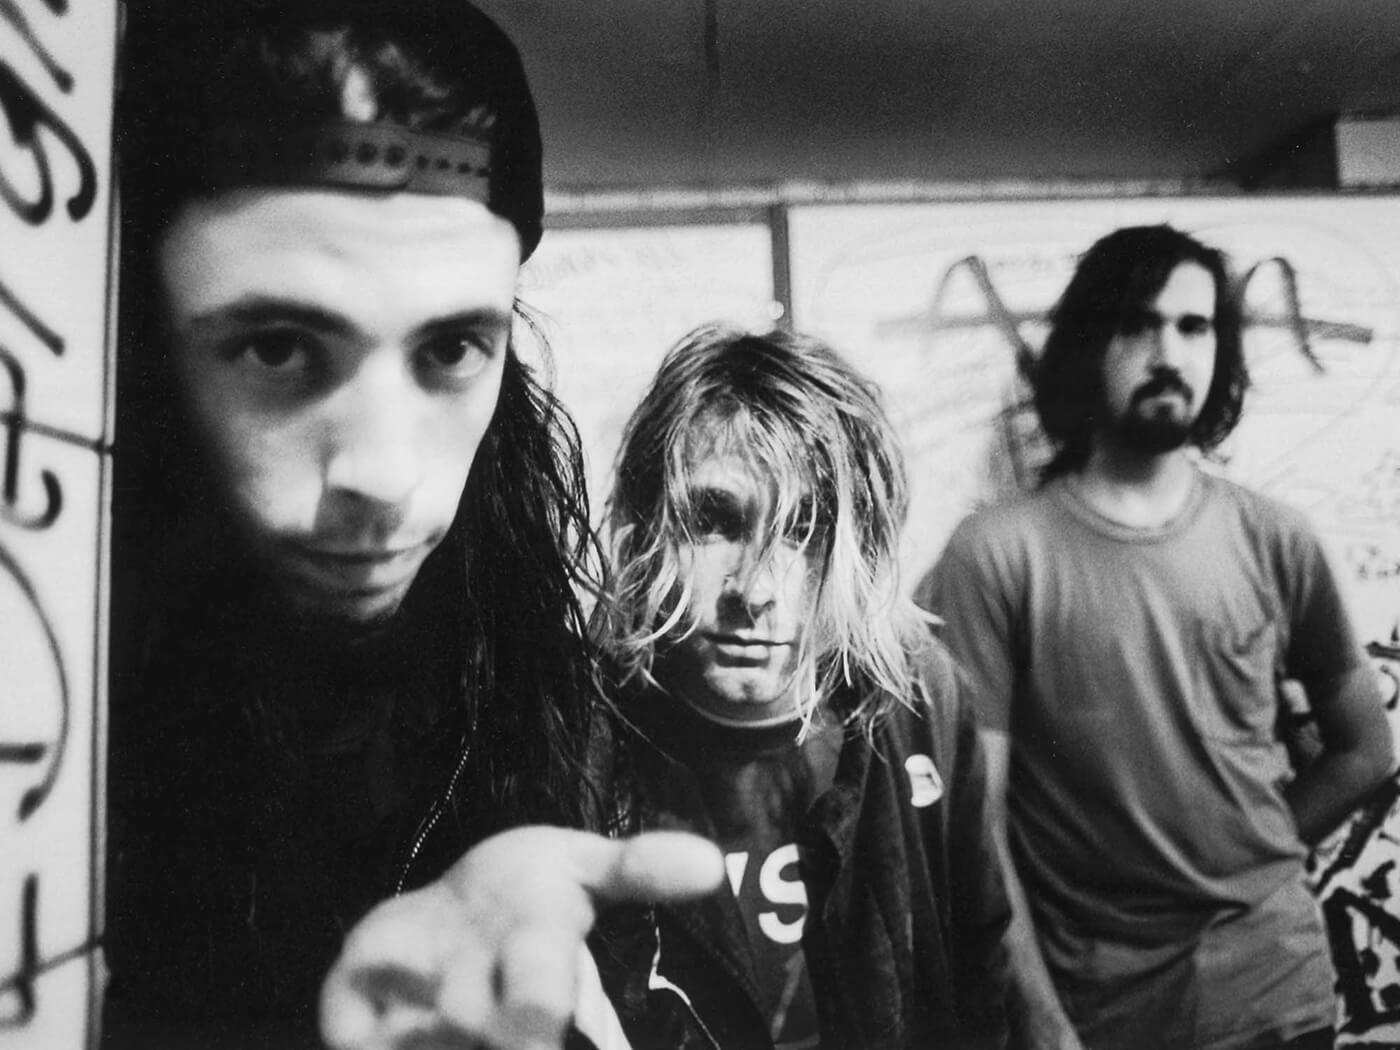 Black and white photo of Nirvana in 1991, by Paul Bergen/Redferns via Getty Images